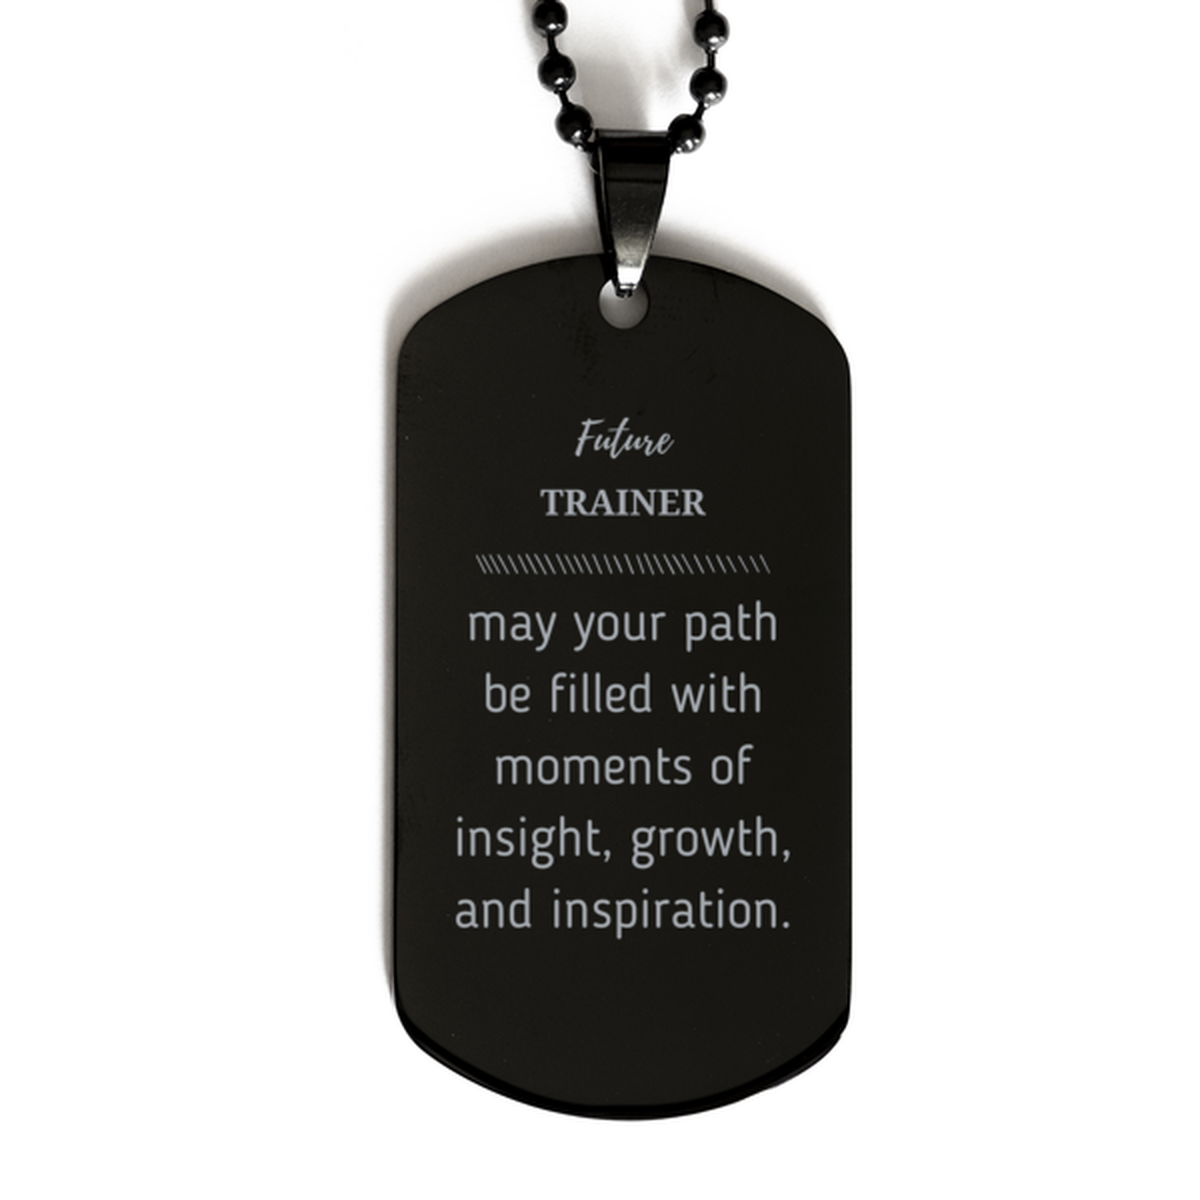 Future Trainer Gifts, May your path be filled with moments of insight, Graduation Gifts for New Trainer, Christmas Unique Black Dog Tag For Men, Women, Friends